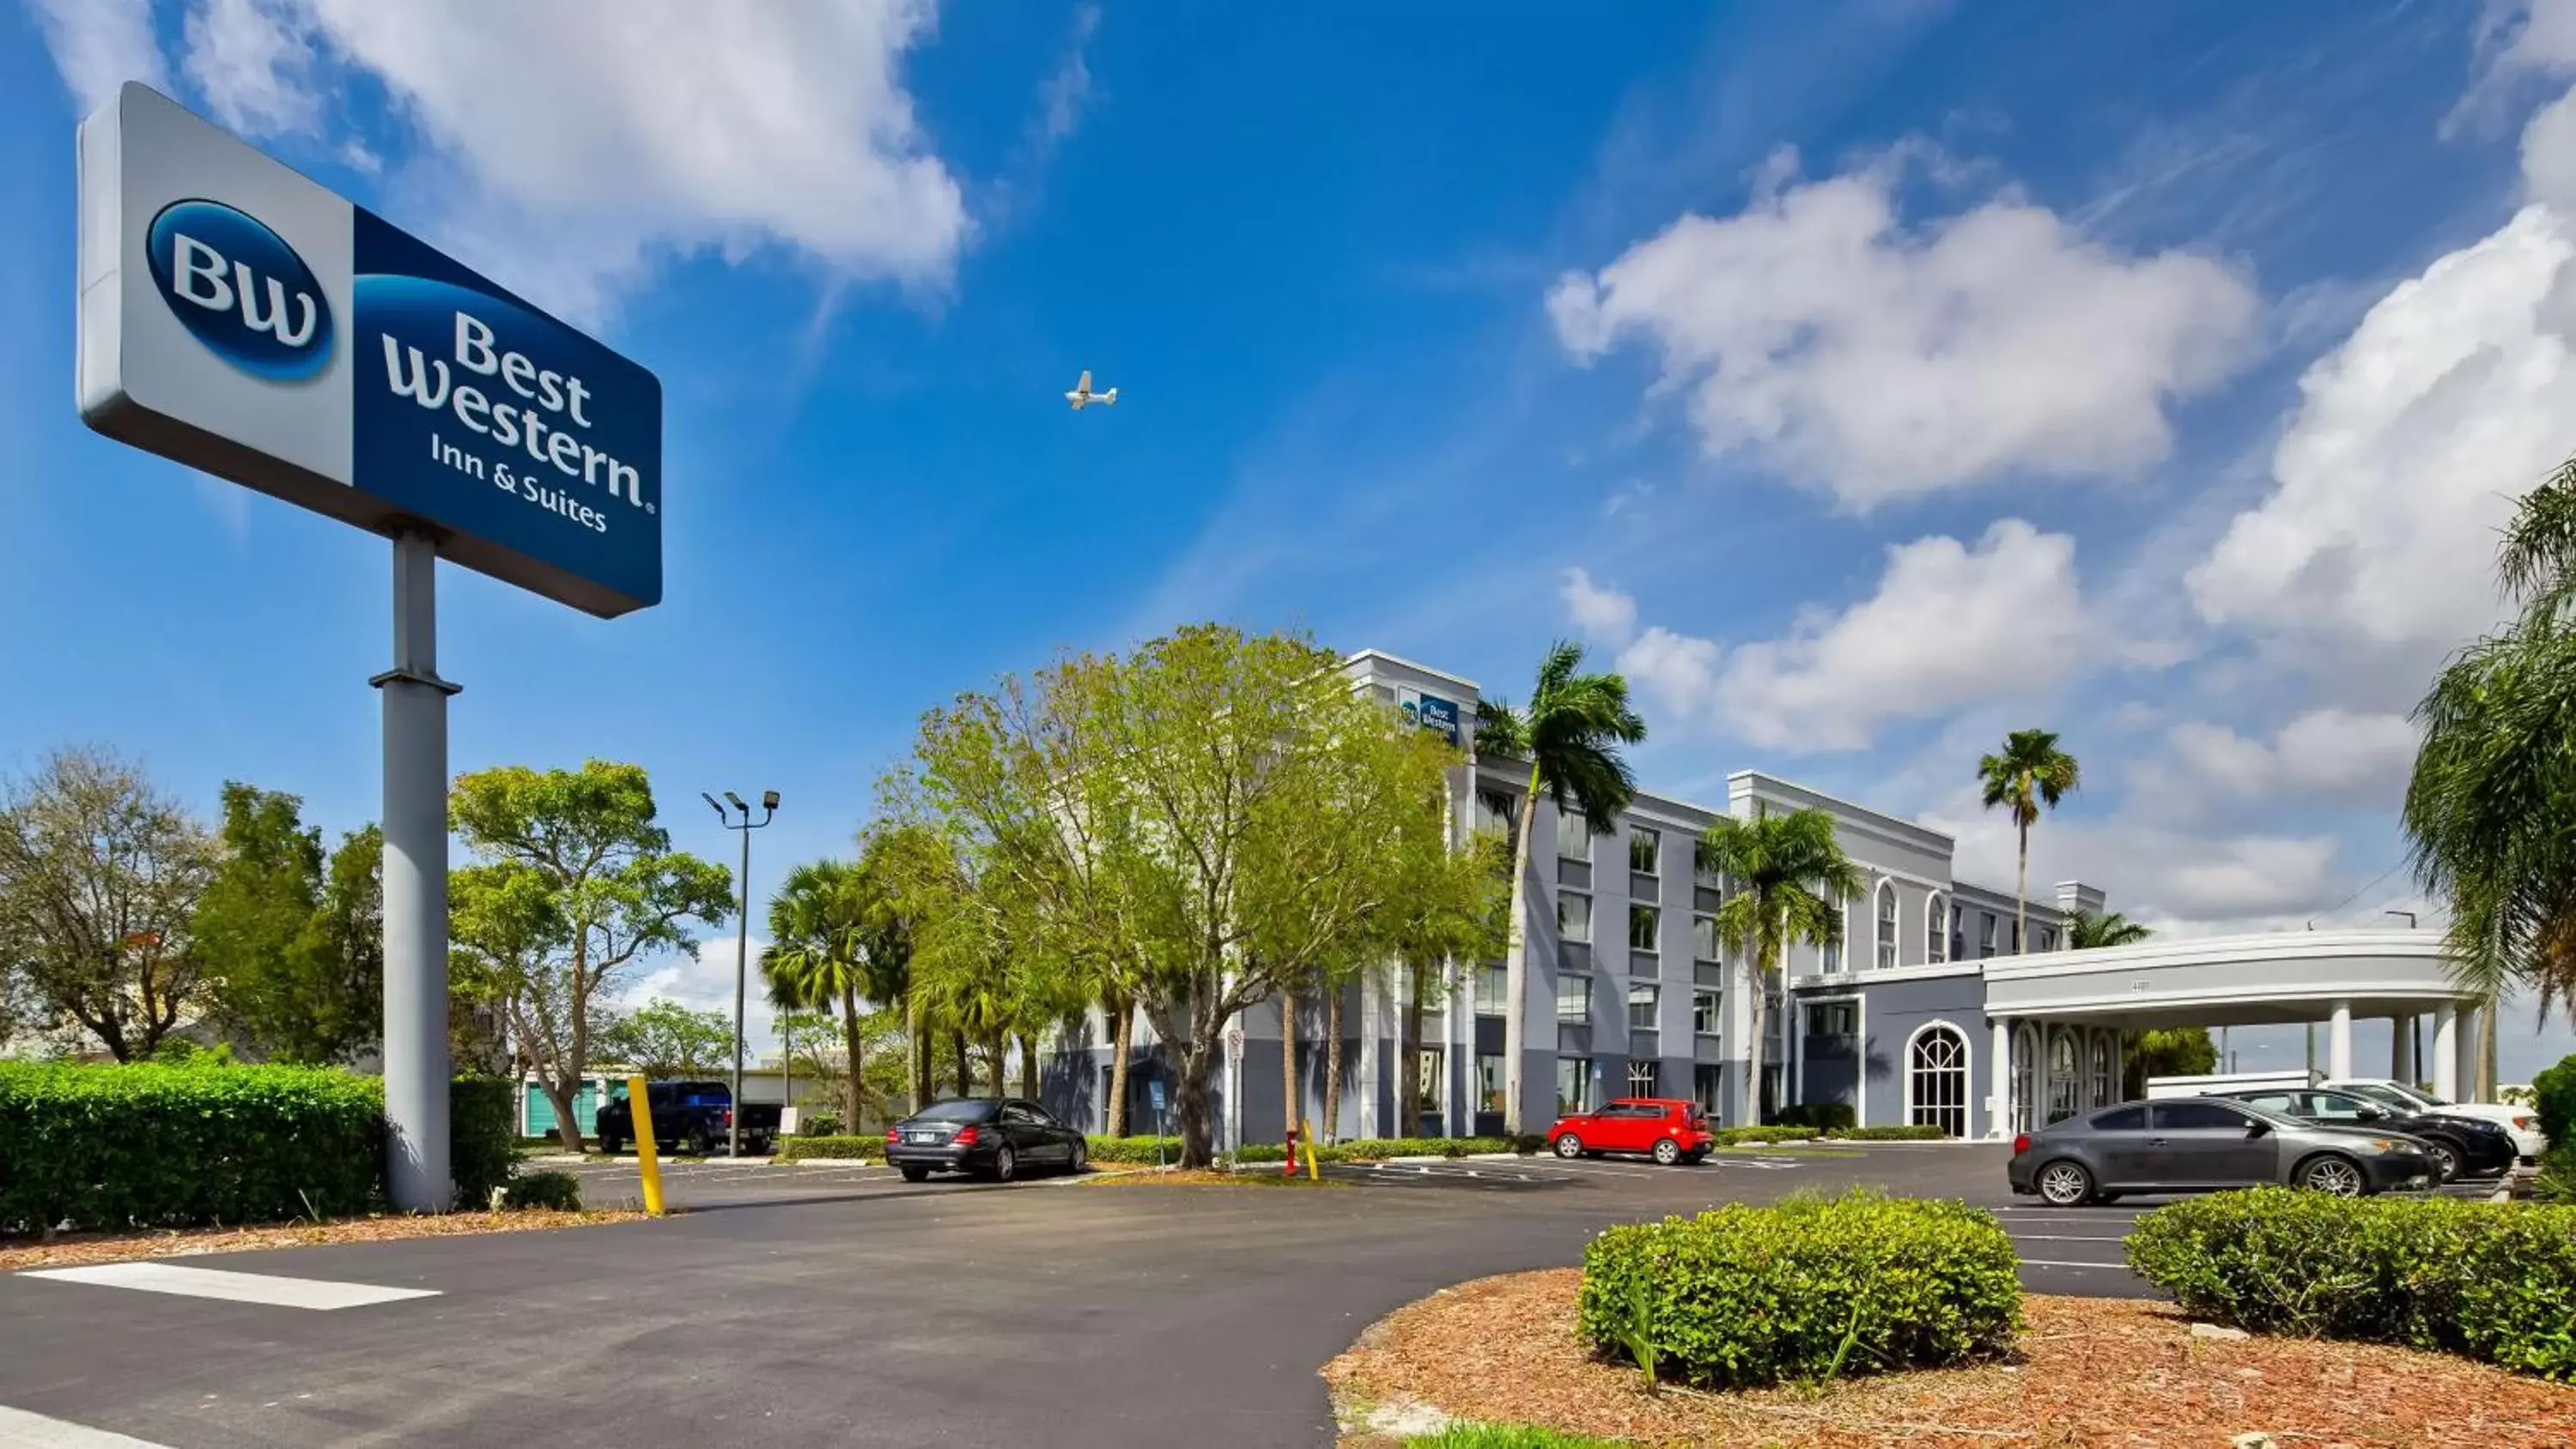 Property building in Best Western Fort Myers Inn and Suites